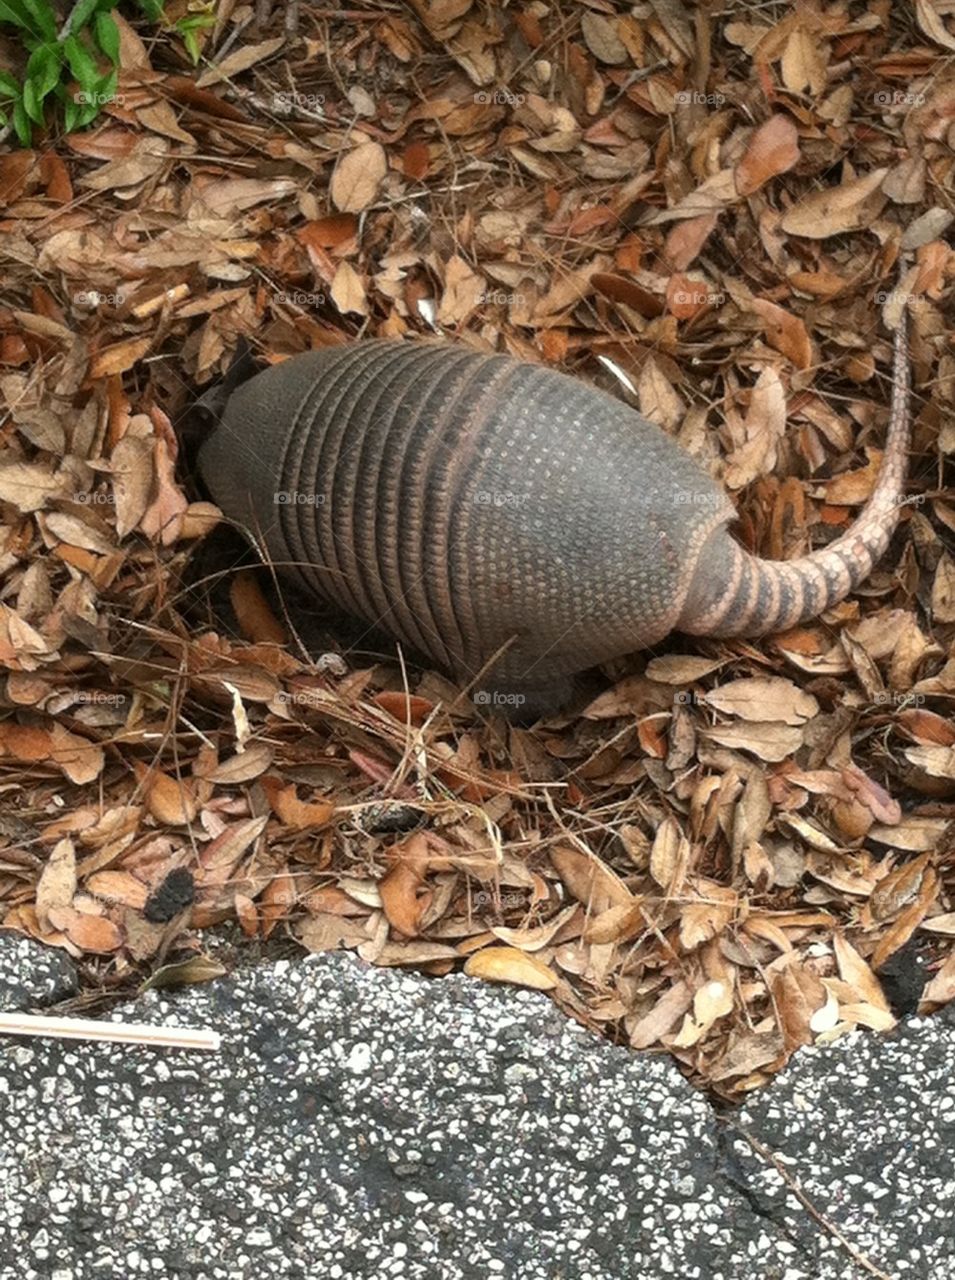 Armadillo on the Prowl